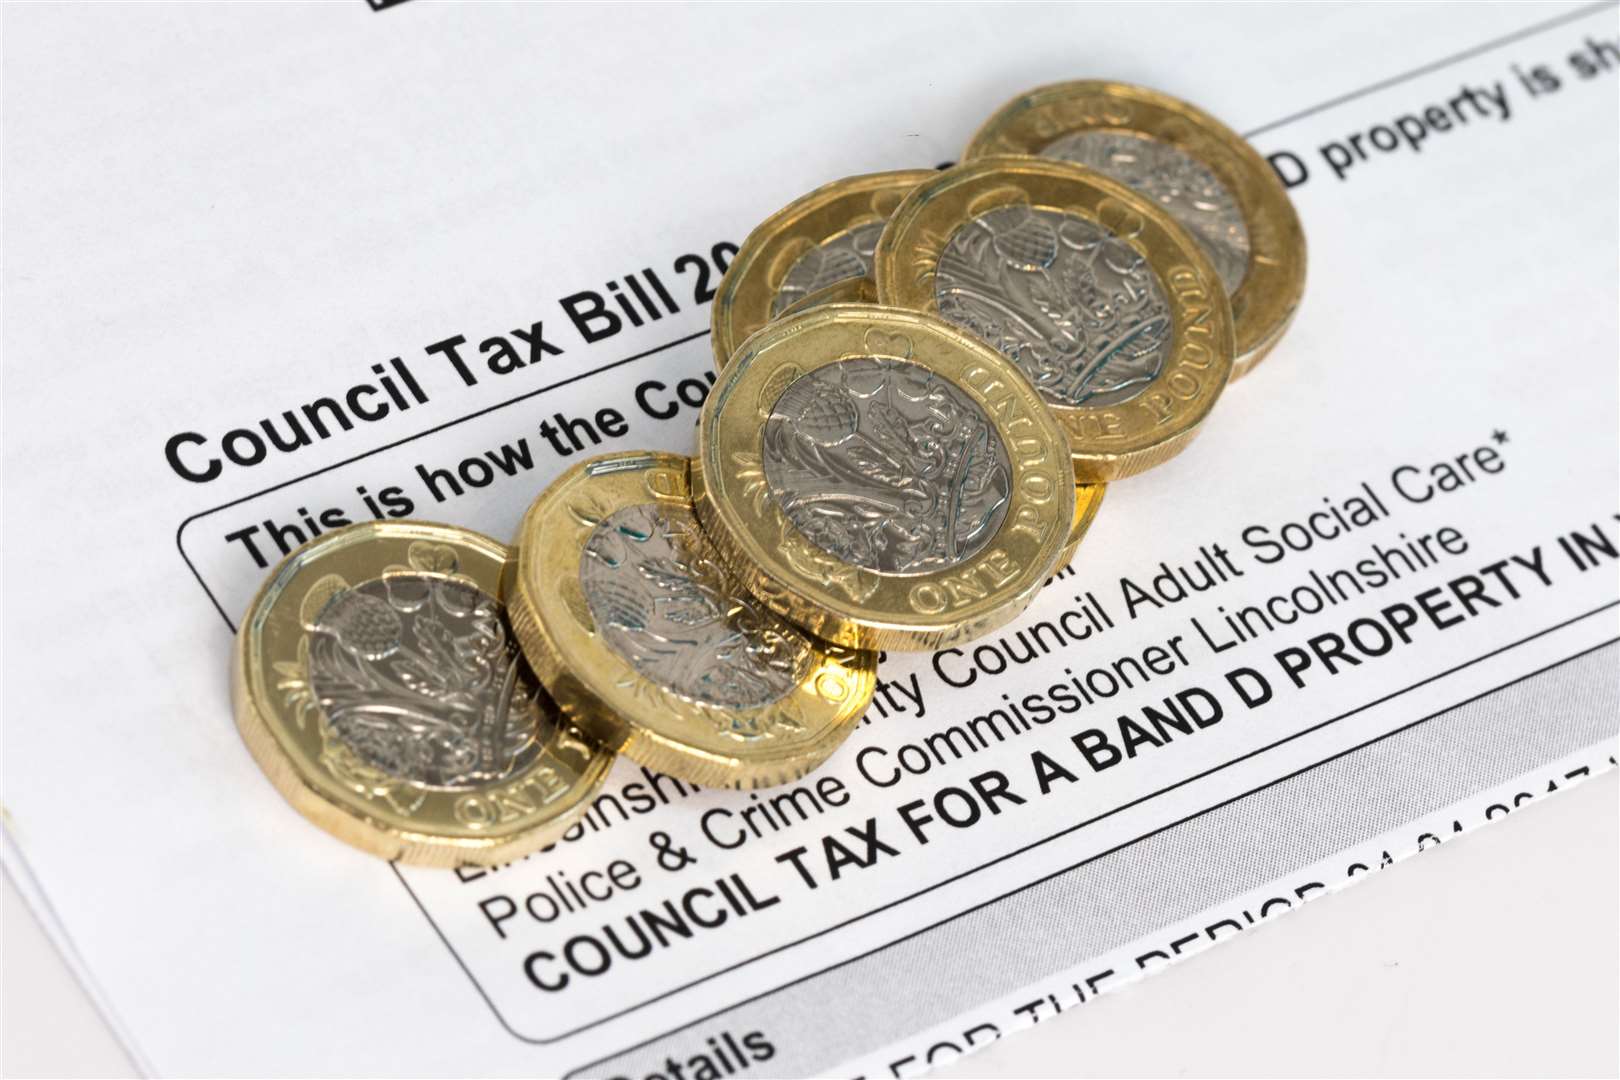 Council tax can now be raised by more than 5% without a referendum by local authorities with social care responsibilities. Stock picture